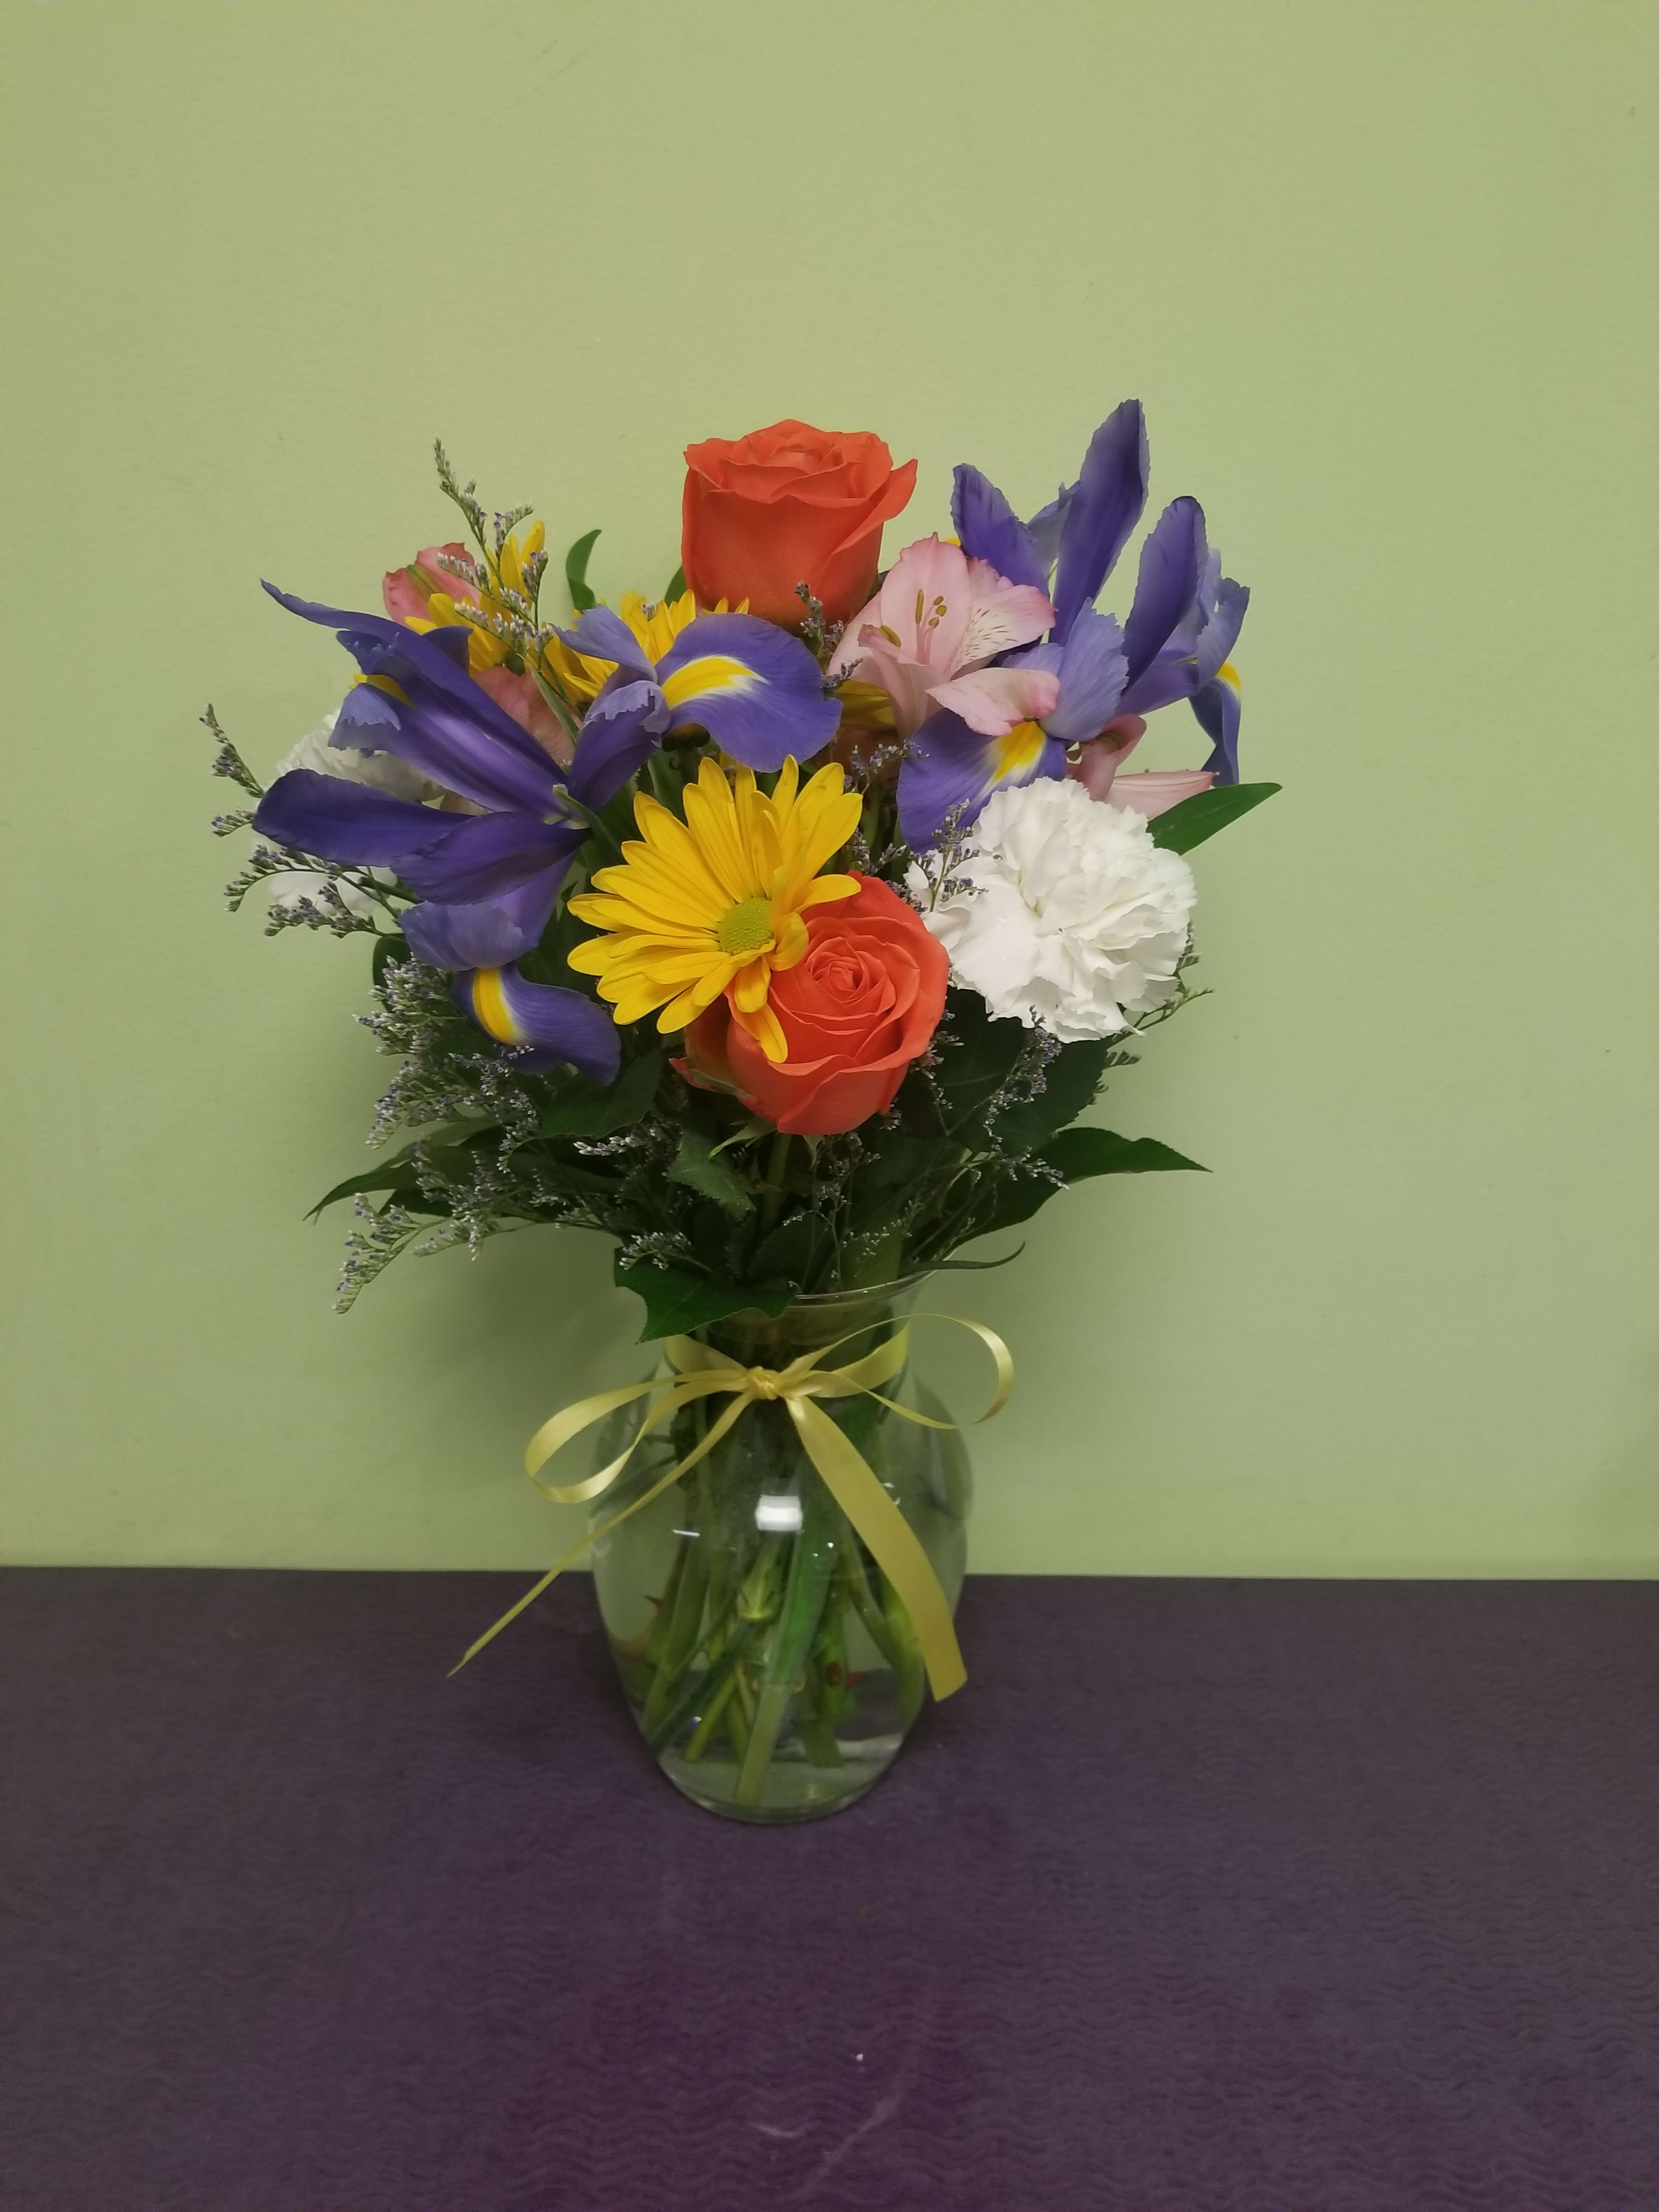 Time for Spring - Includes Roses, Daisies, and Iris!